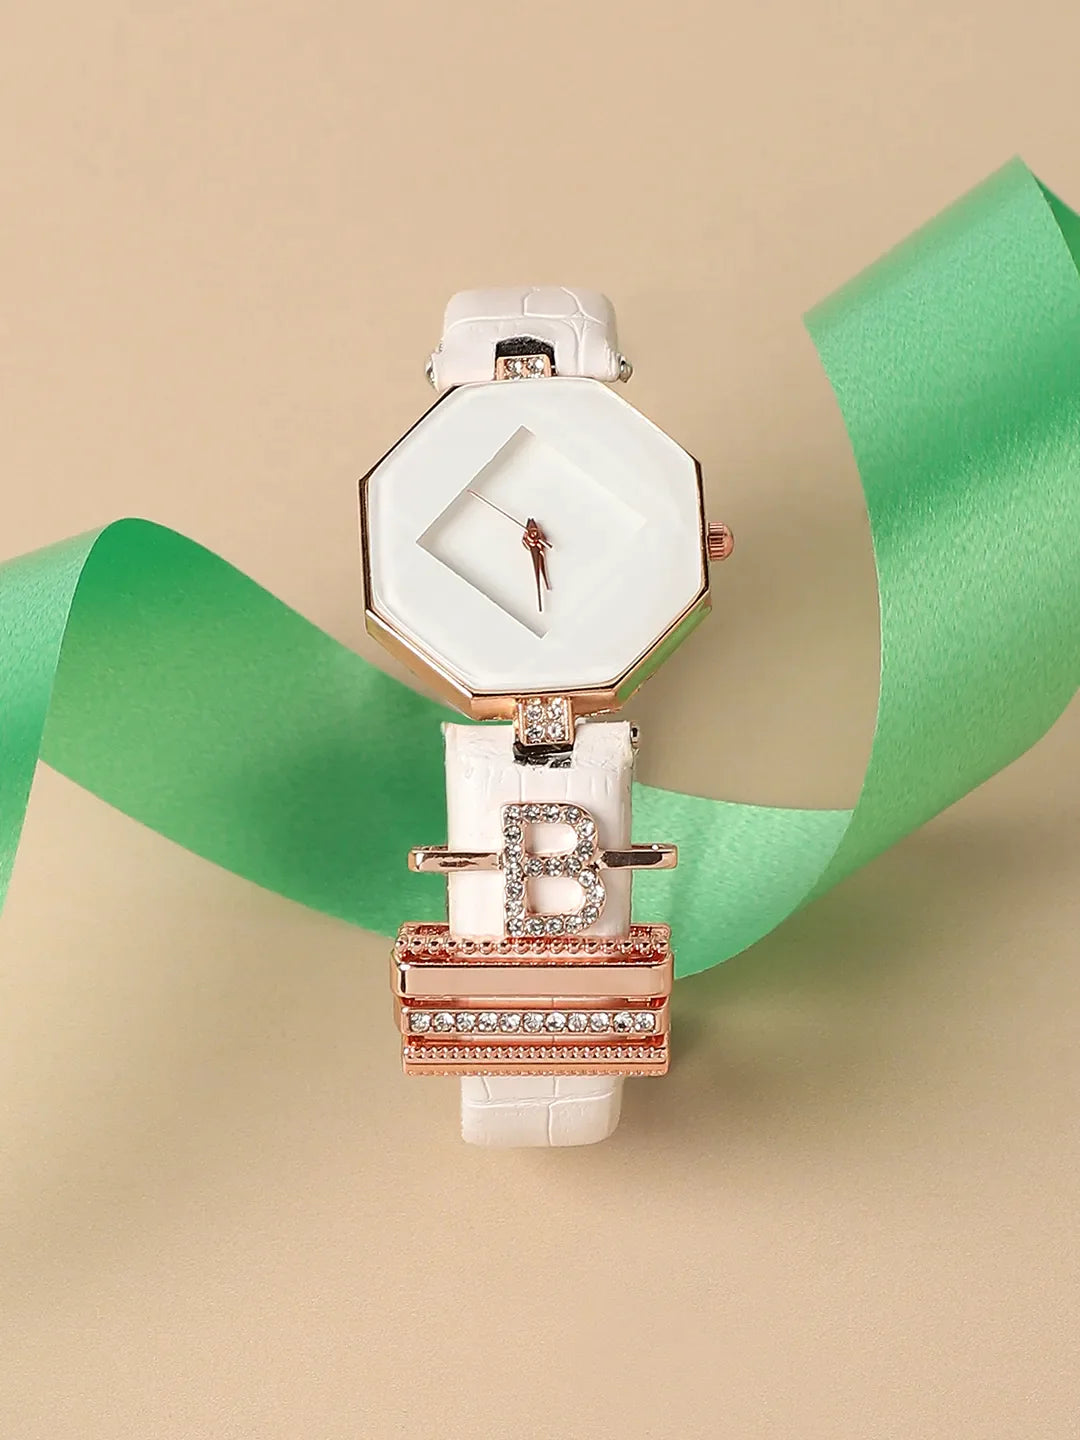 Hectagon Analog Watch With B Initial Watch Charm - White